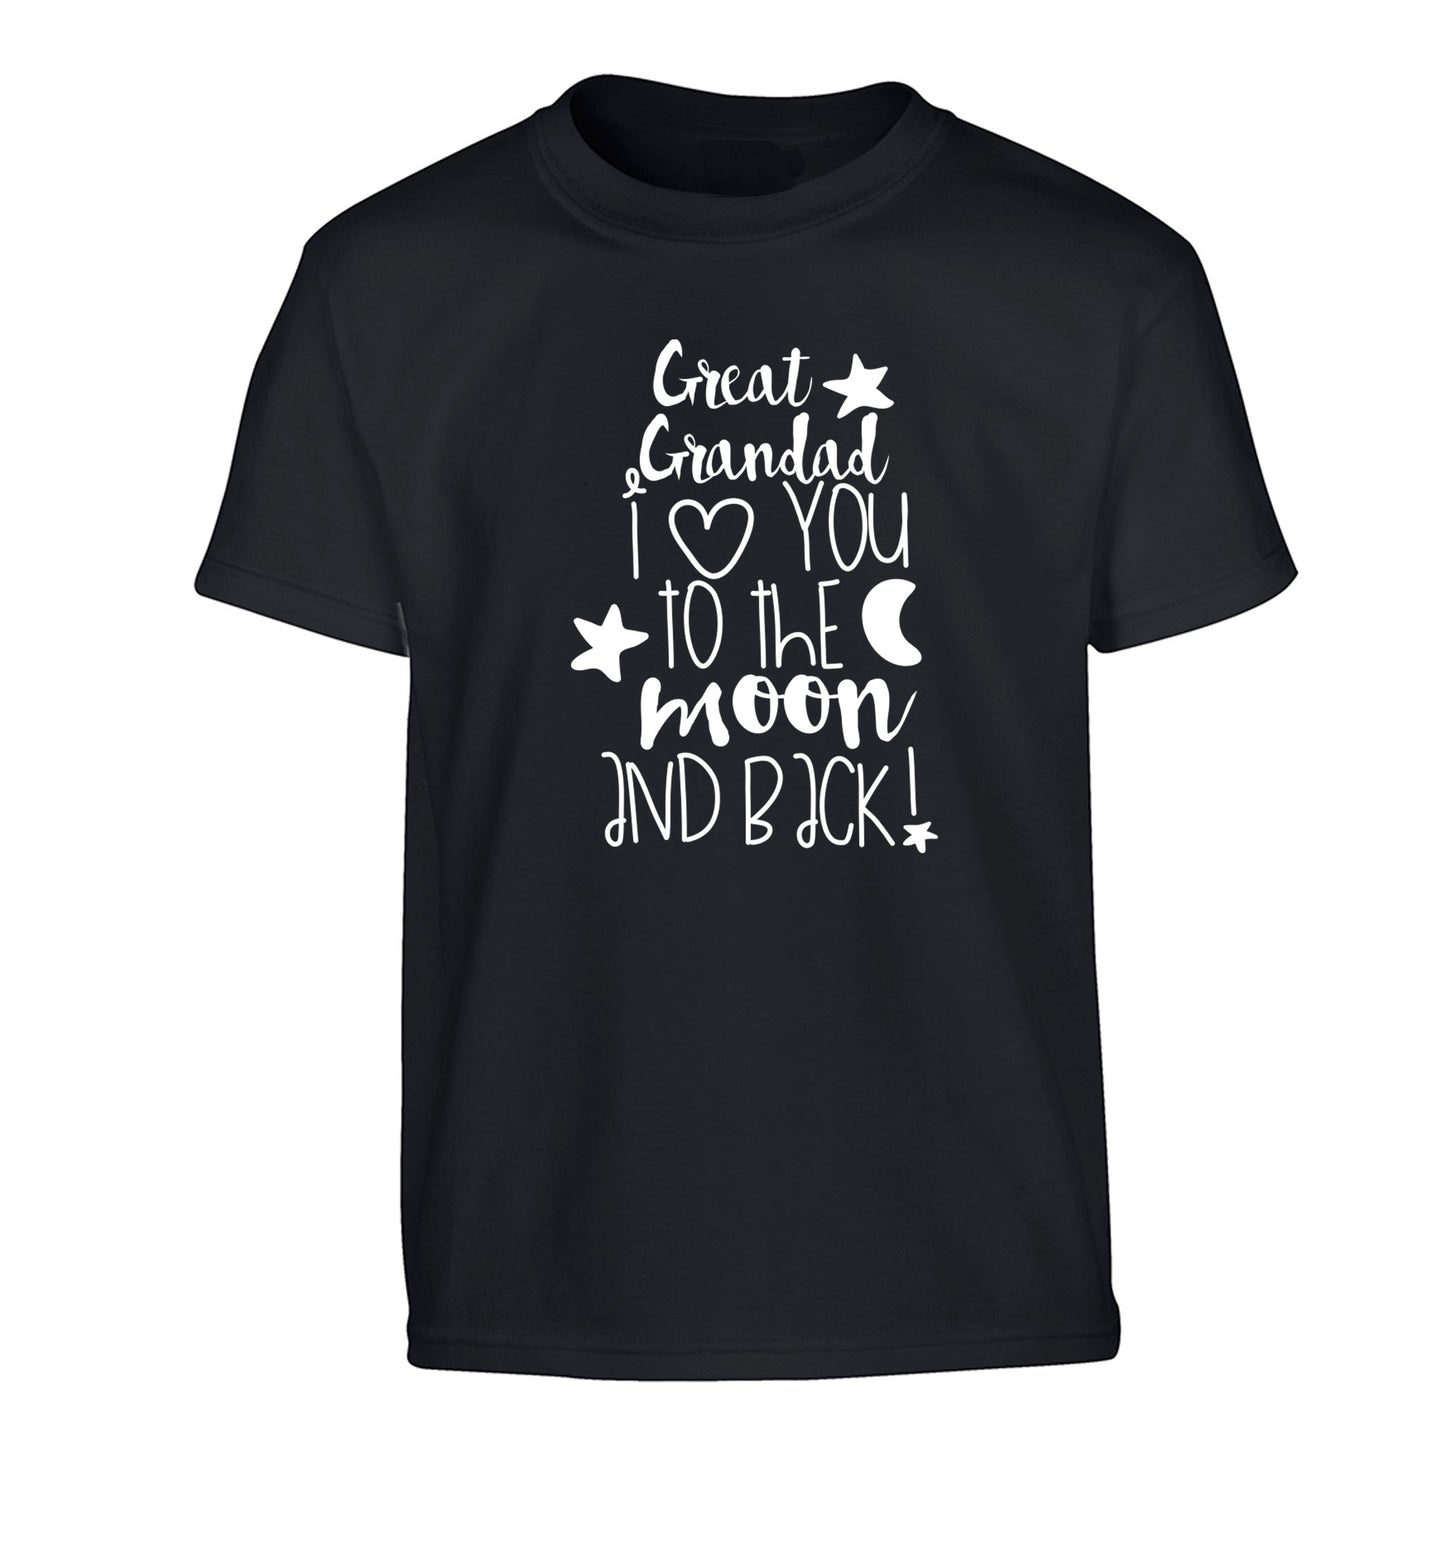 Great Grandad I love you to the moon and back Children's black Tshirt 12-14 Years